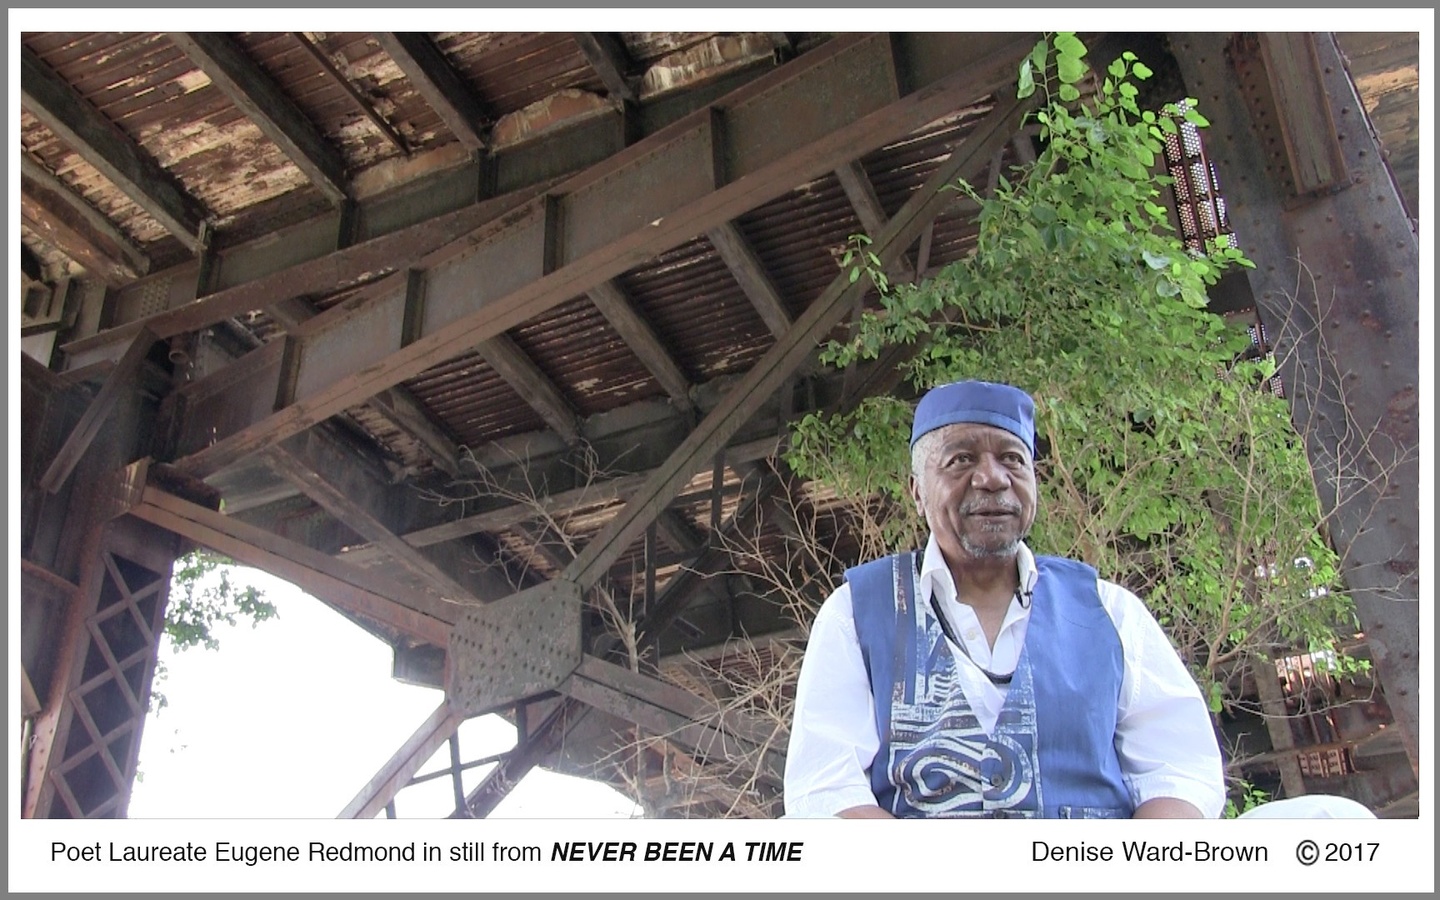 Text reads, "Poet Laureate Eugene Redmond in still from NEVER BEEN A TIME" above a still from the video, in which Redmond wears a white shirt with ea blue vest and cap, under the floor of a wooden structure. There is a tree behind him.